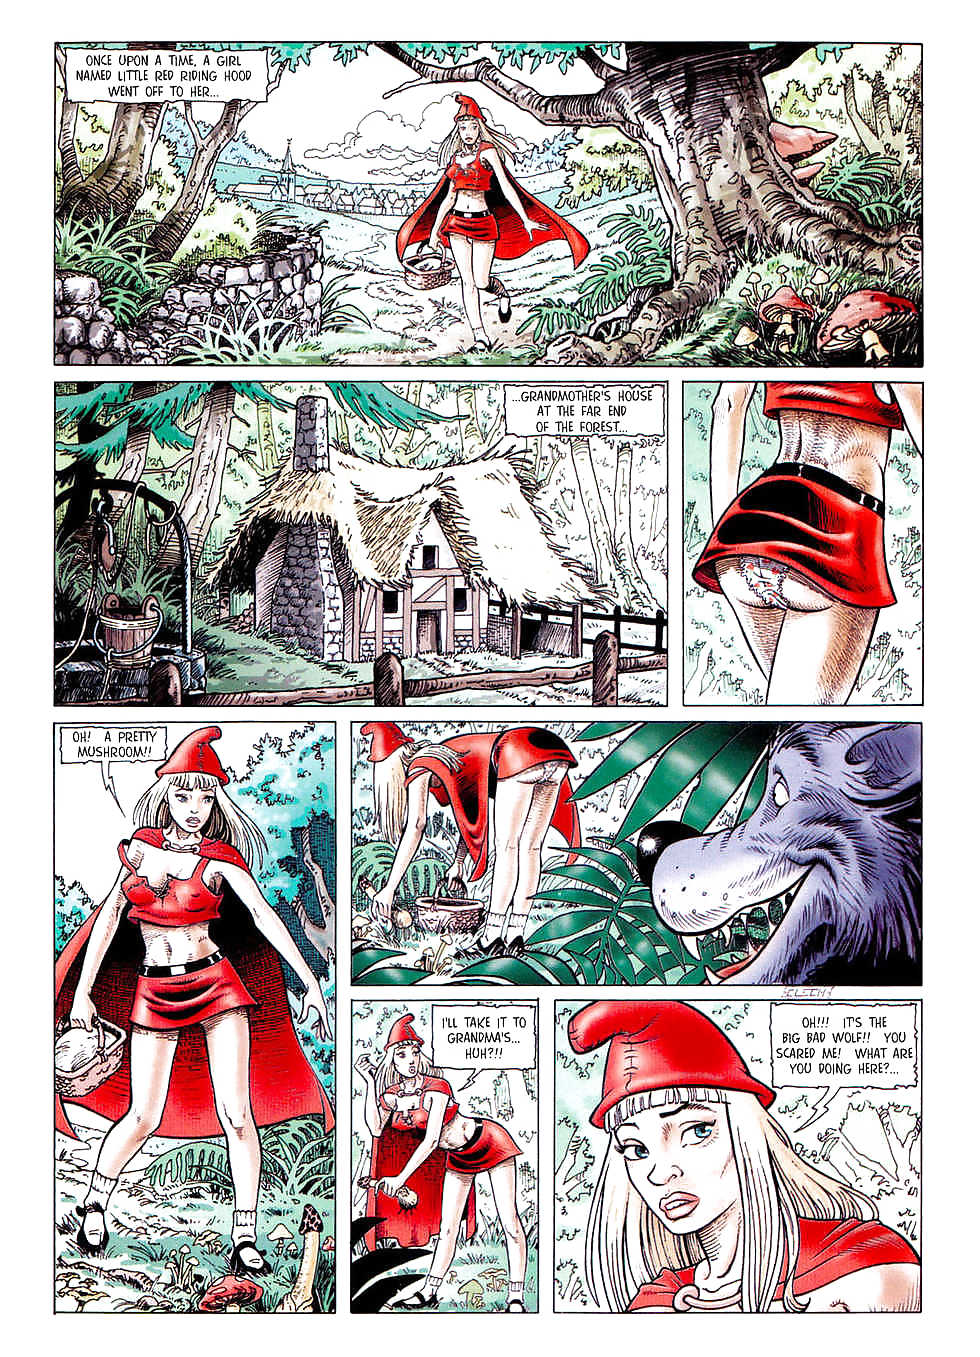 Little Red Riding Hood (the real story) #18035188